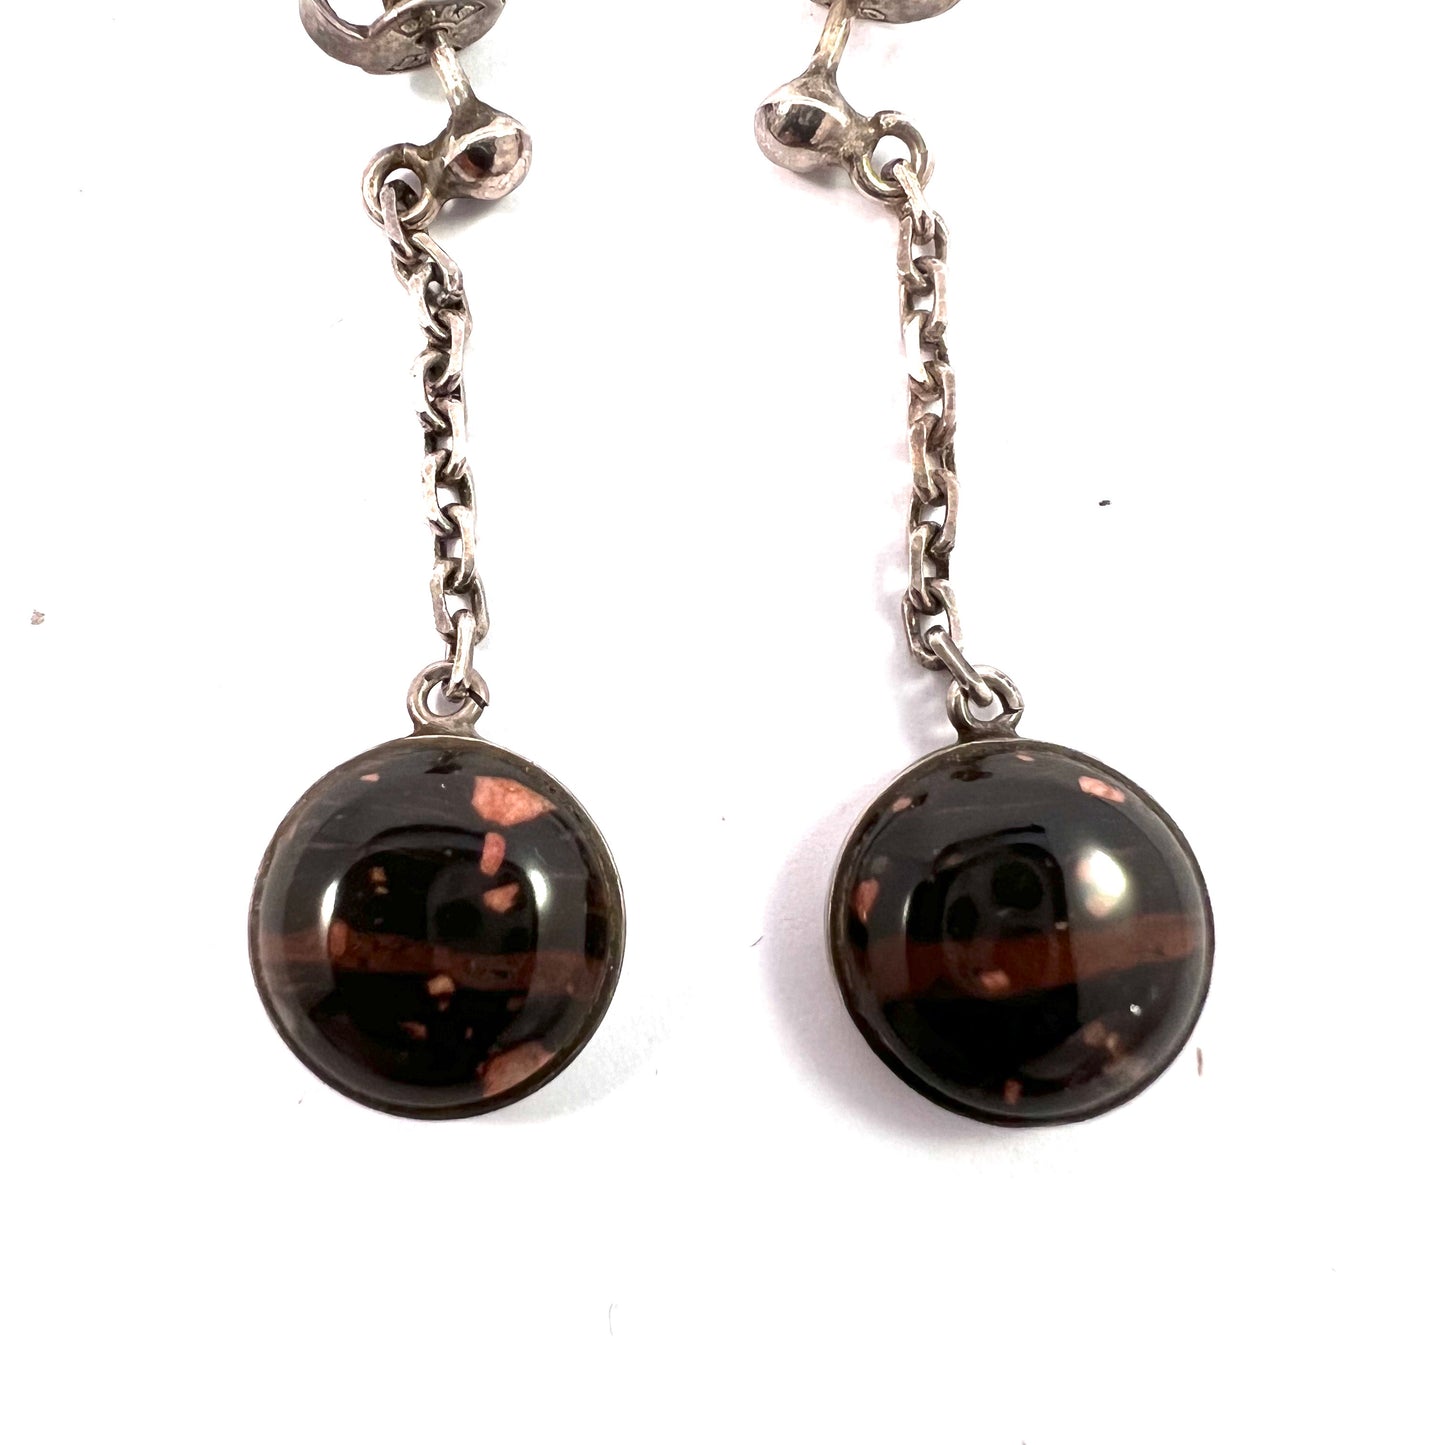 North Sweden c 1970s. Vintage Sterling Silver Local Porphyry Earrings.